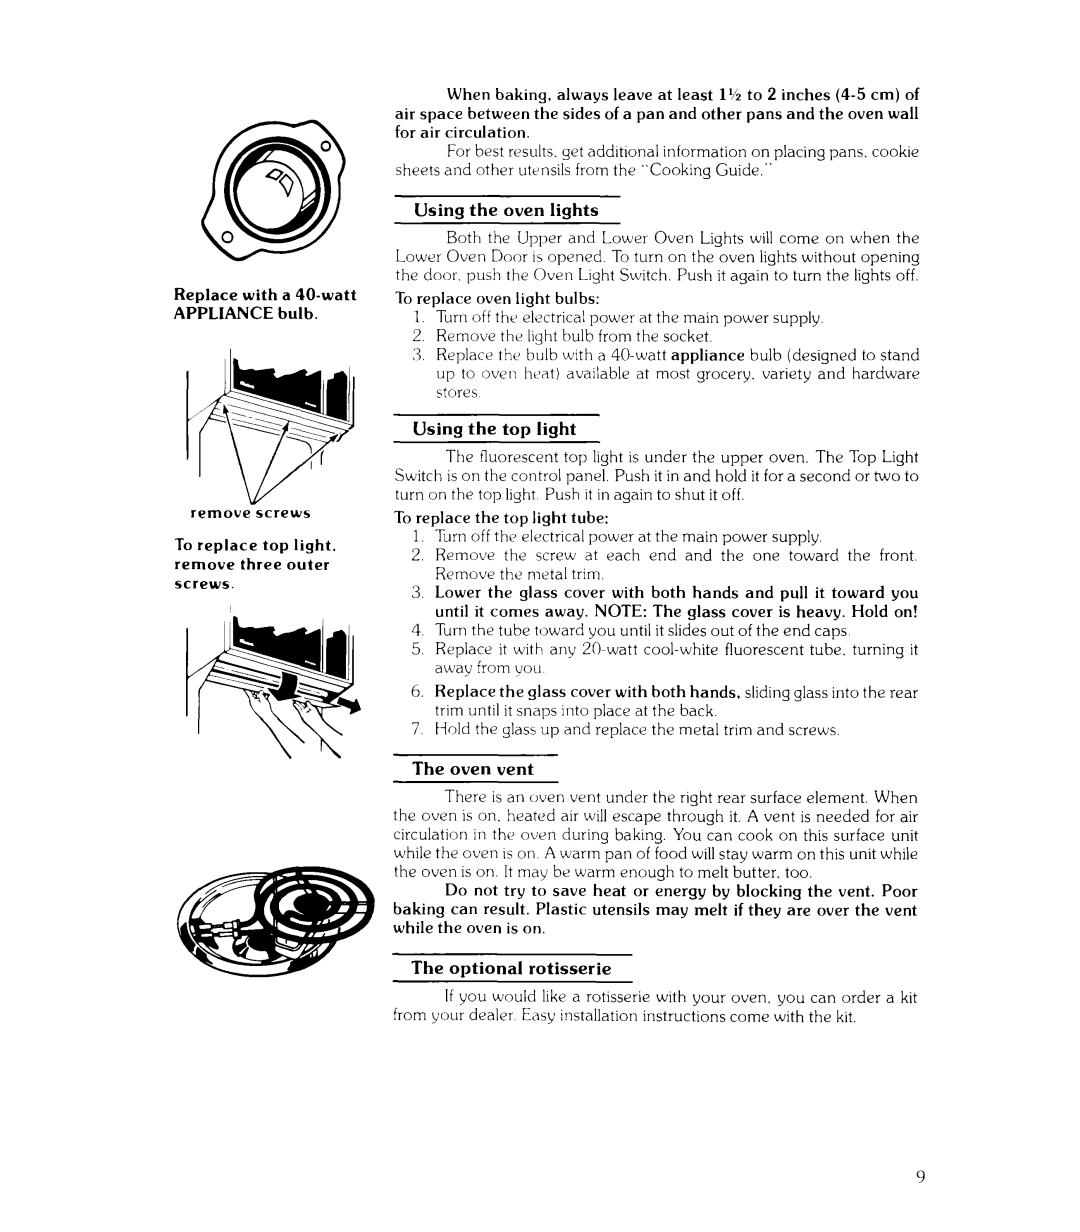 Whirlpool RJE-953PP manual Remove the light bulb from the socket 